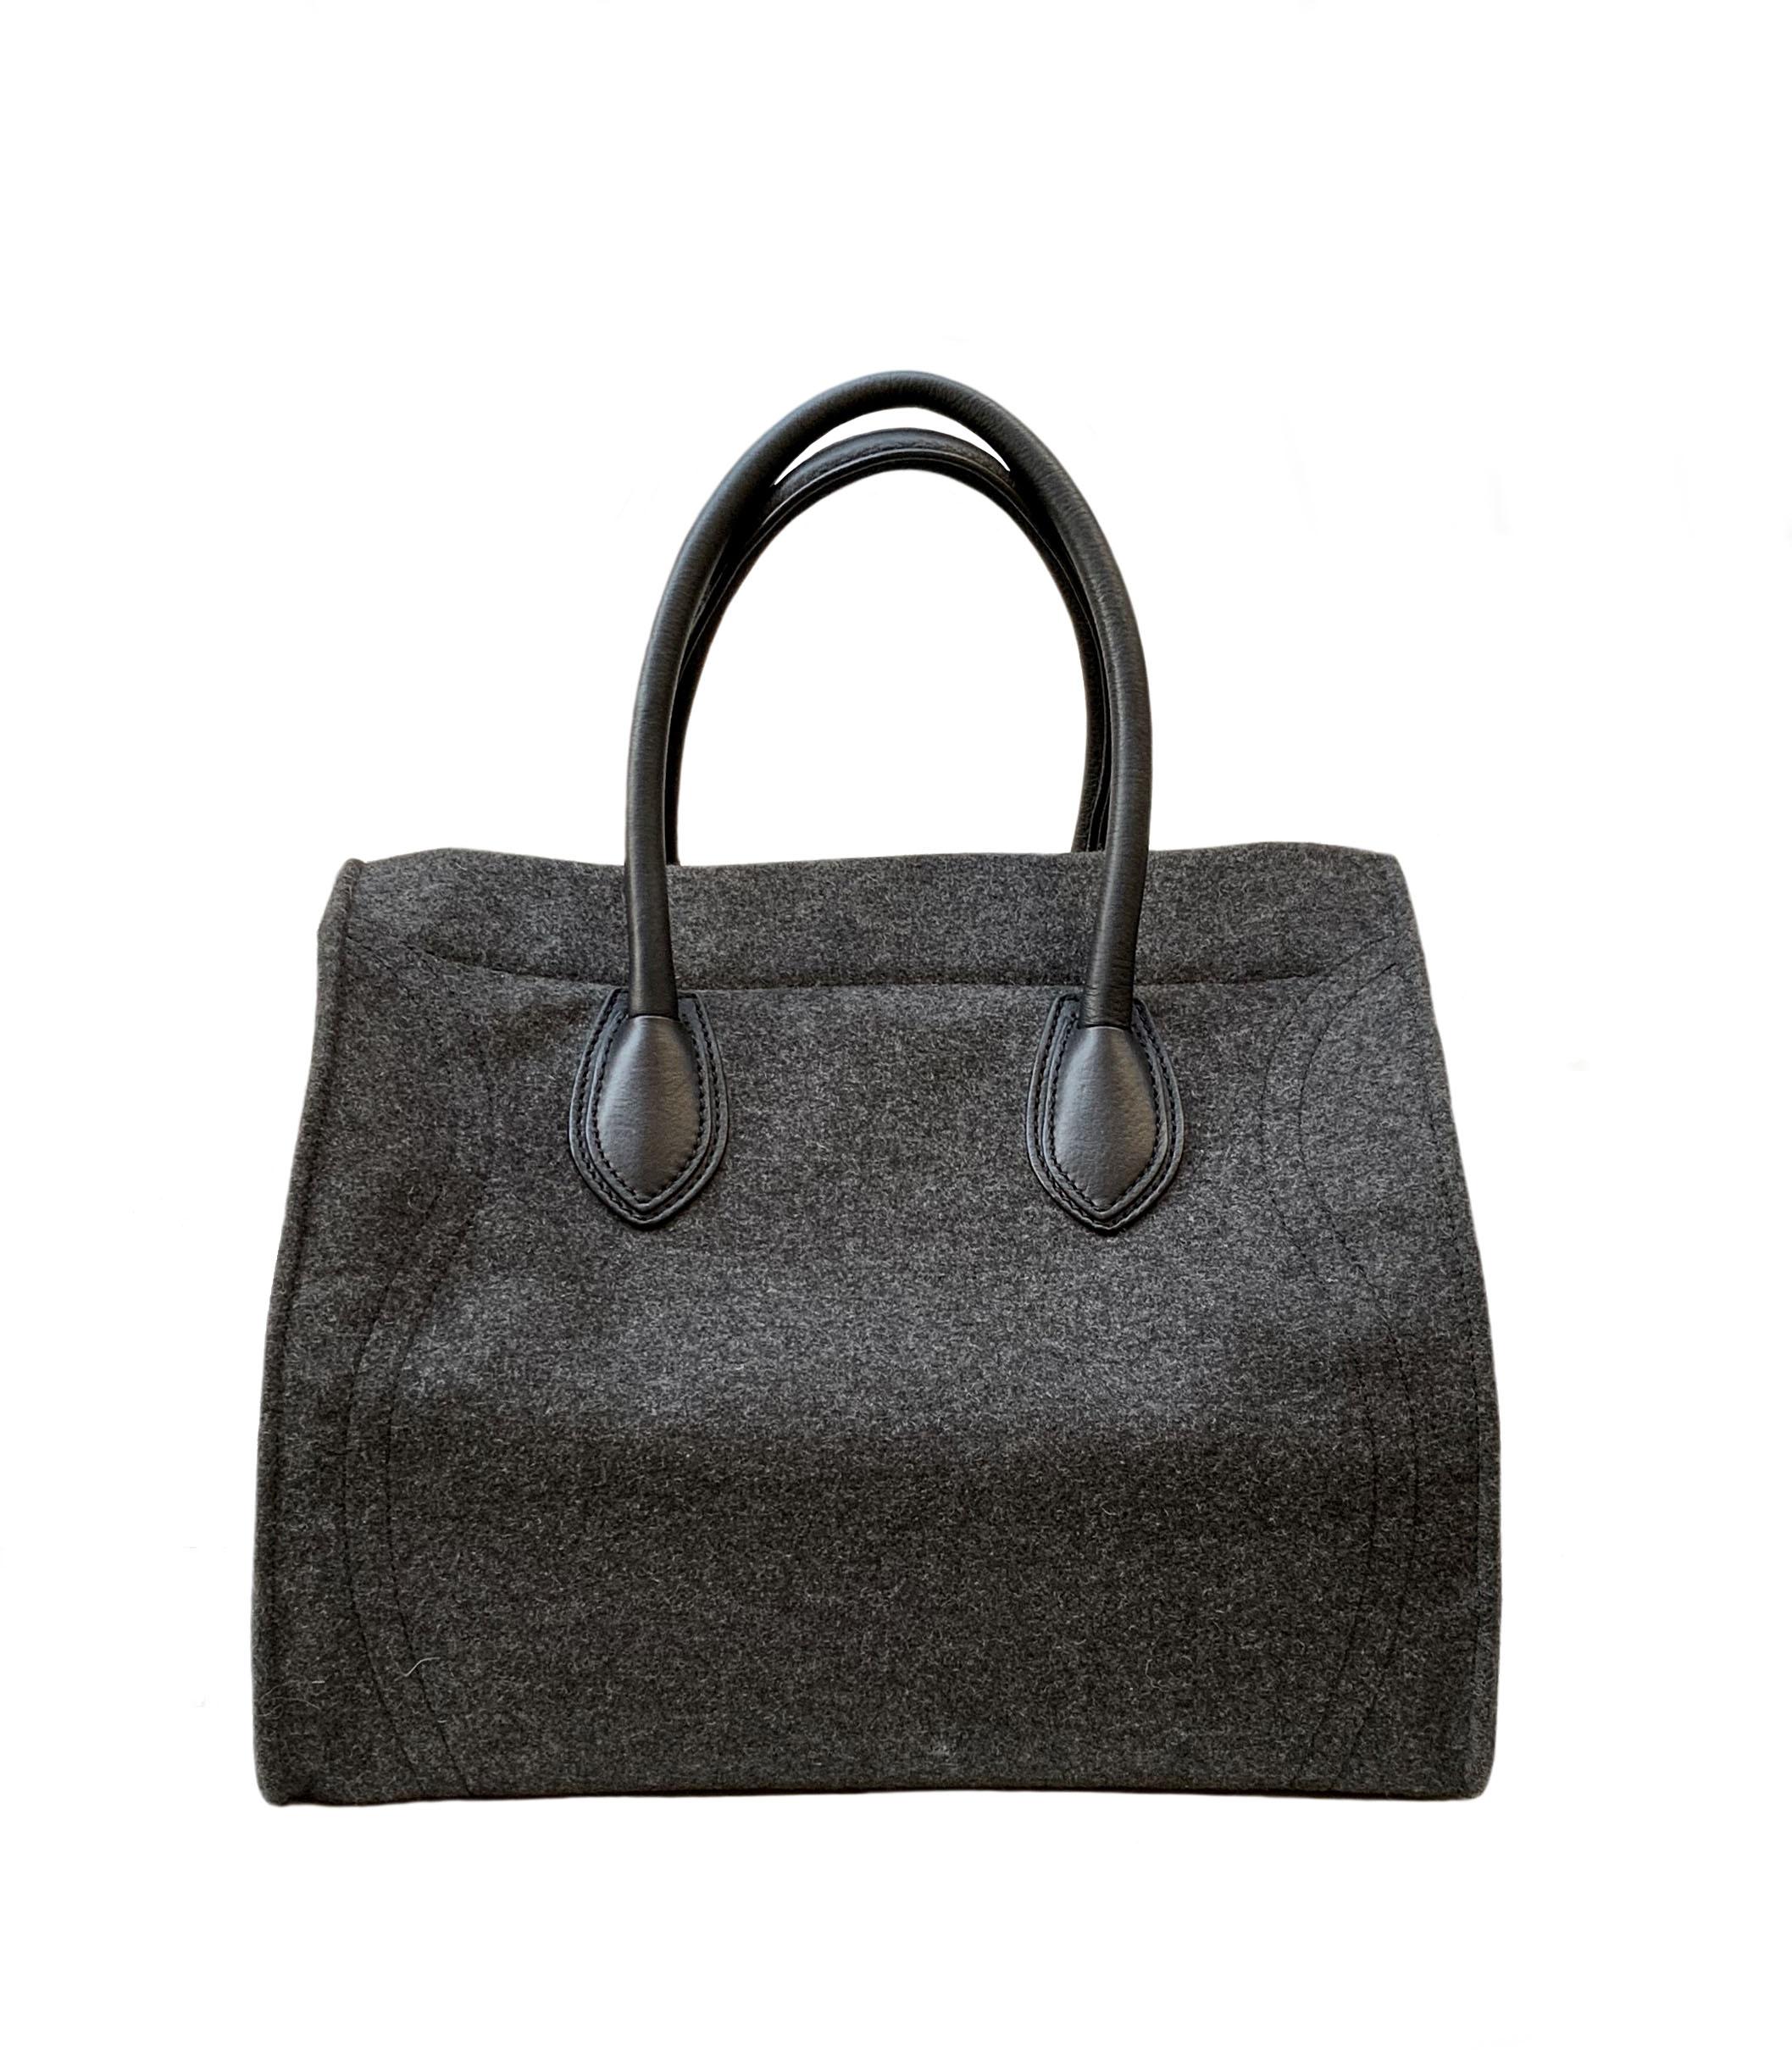 This pre-owned Celine Phantom Luggage tote bag is crafed in grey felt wool. 
It features double rolled handles with detailing stitching, one front zip pocket.
Its line is simple, its color discreet and its weight ultra-light !
A must for this season